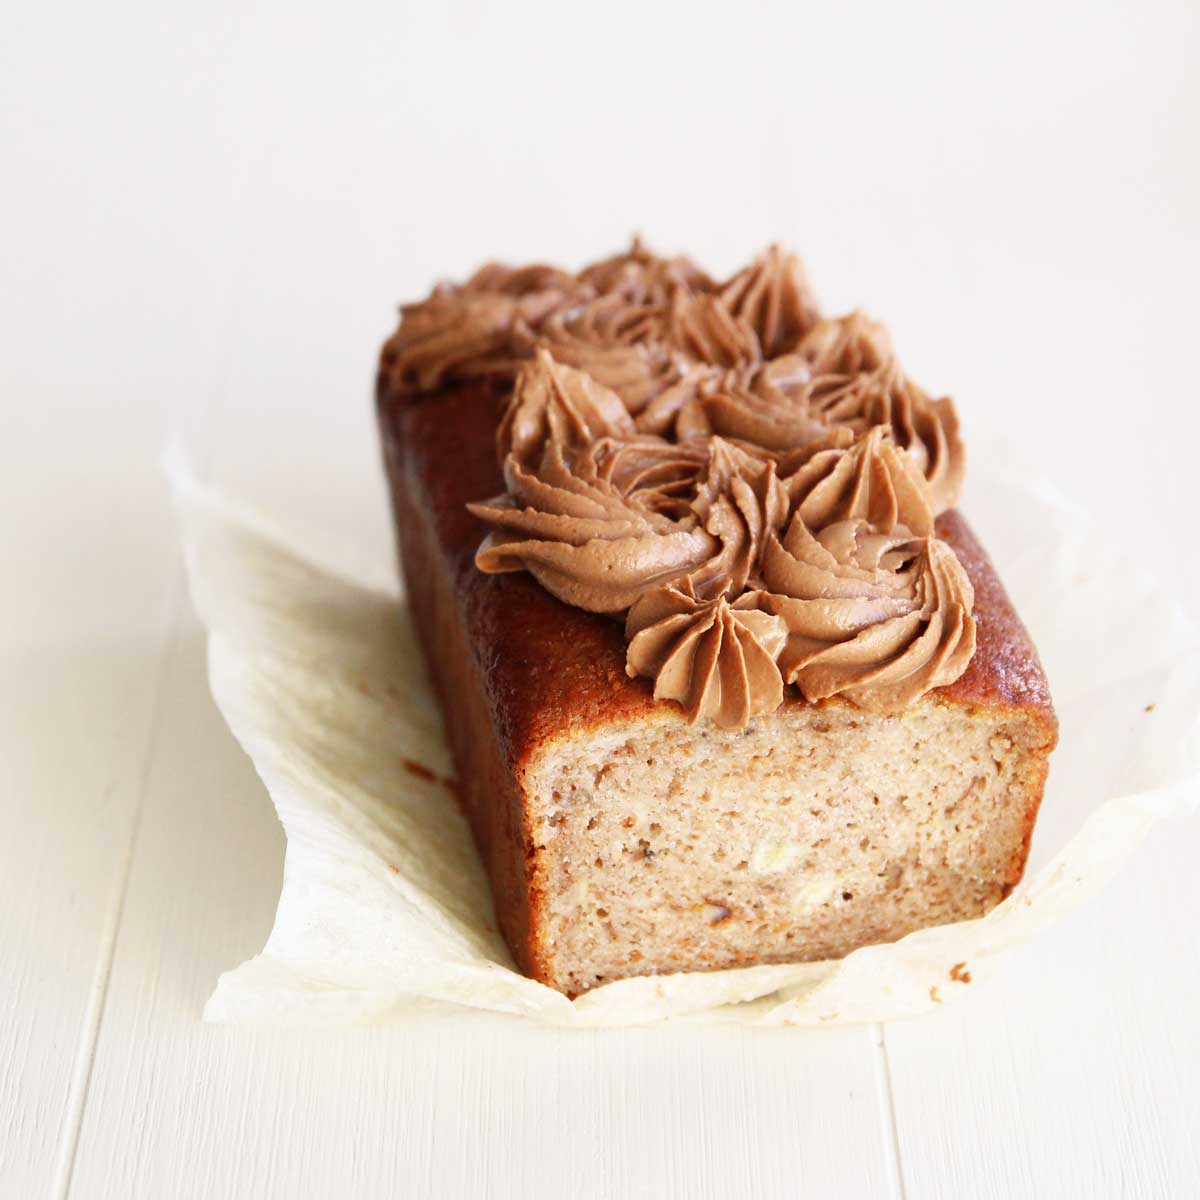 Ultimate List of Banana Bread Ideas - Part 2: Icing, Frosting & Topping Variations - Frosting